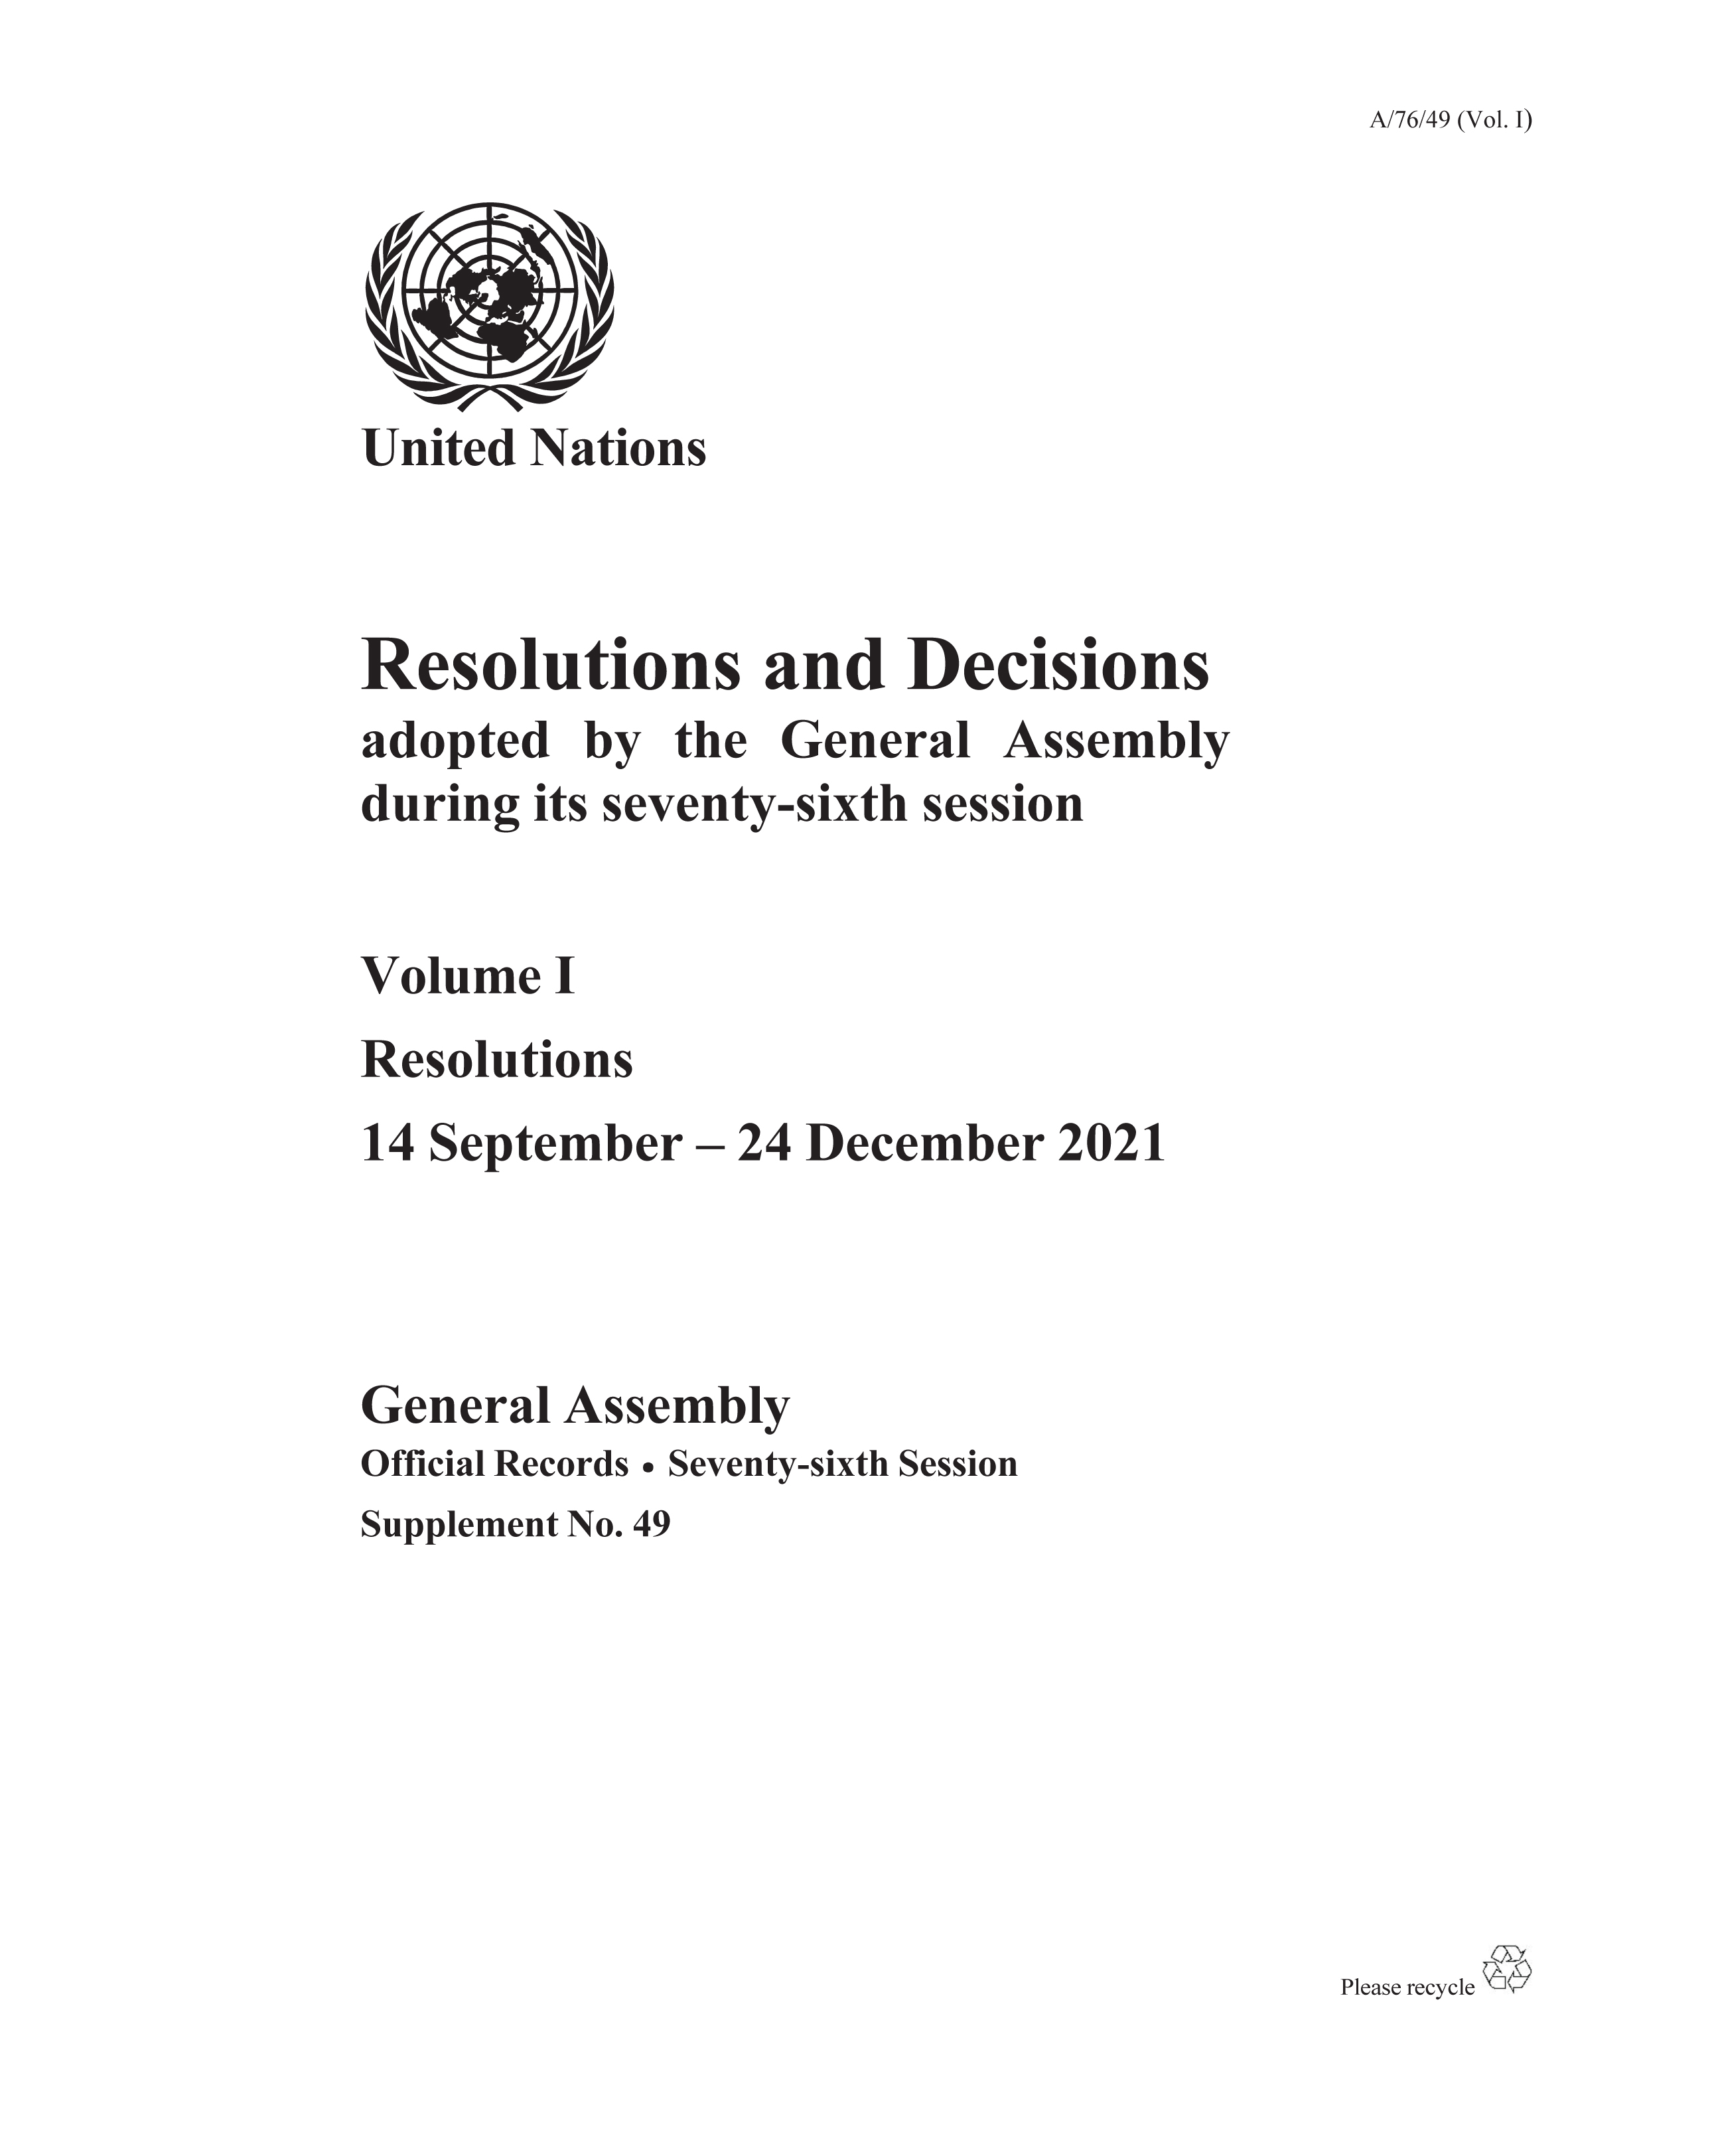 image of Resolutions and Decisions Adopted by the General Assembly During its Seventy-sixth Session: Volume I